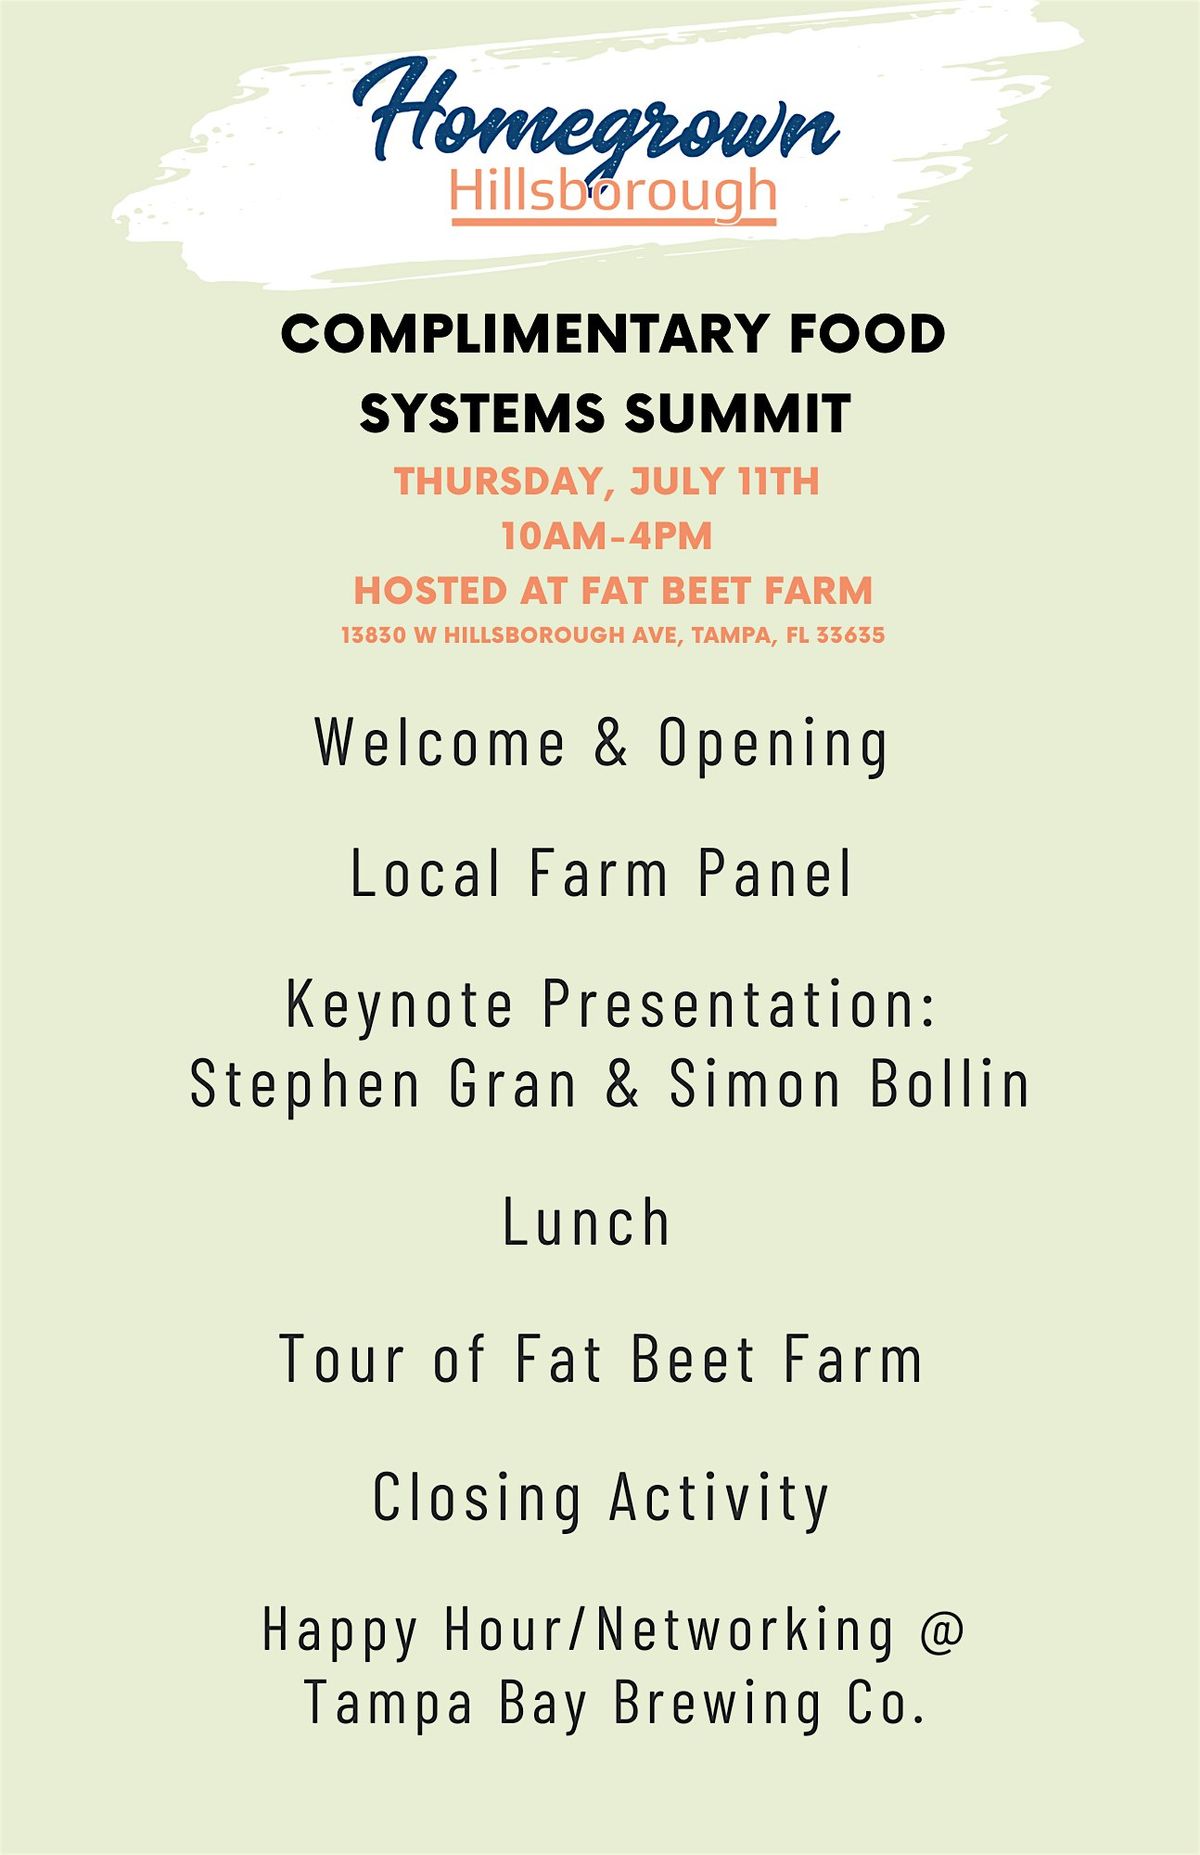 Partnership Summit #5: Complimentary Food Systems